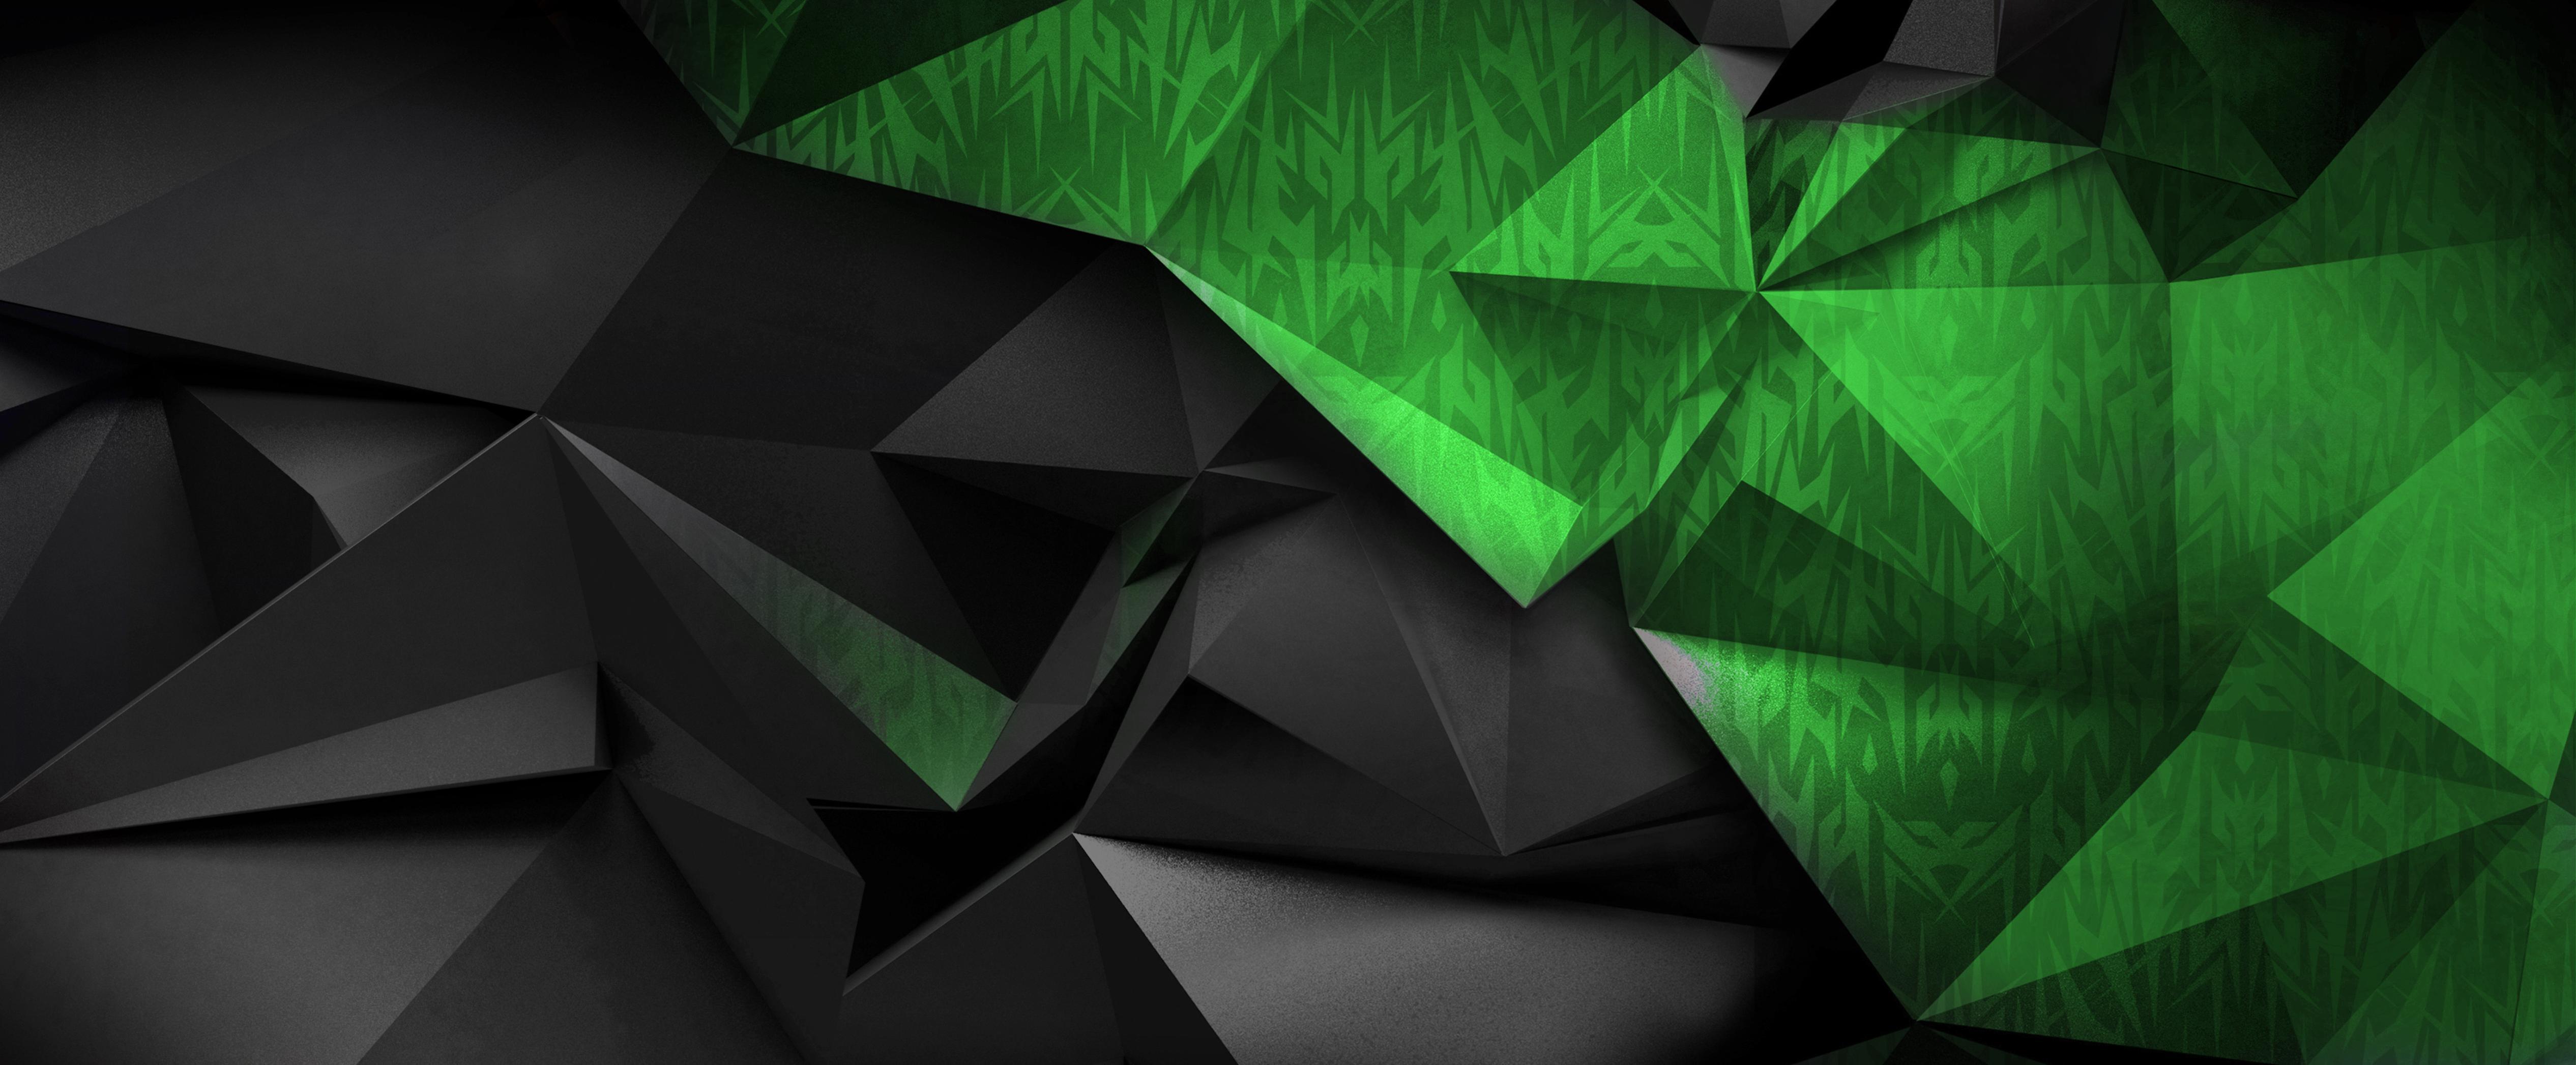 Green And Black Gaming Wallpapers Top Free Green And Black Gaming Backgrounds Wallpaperaccess